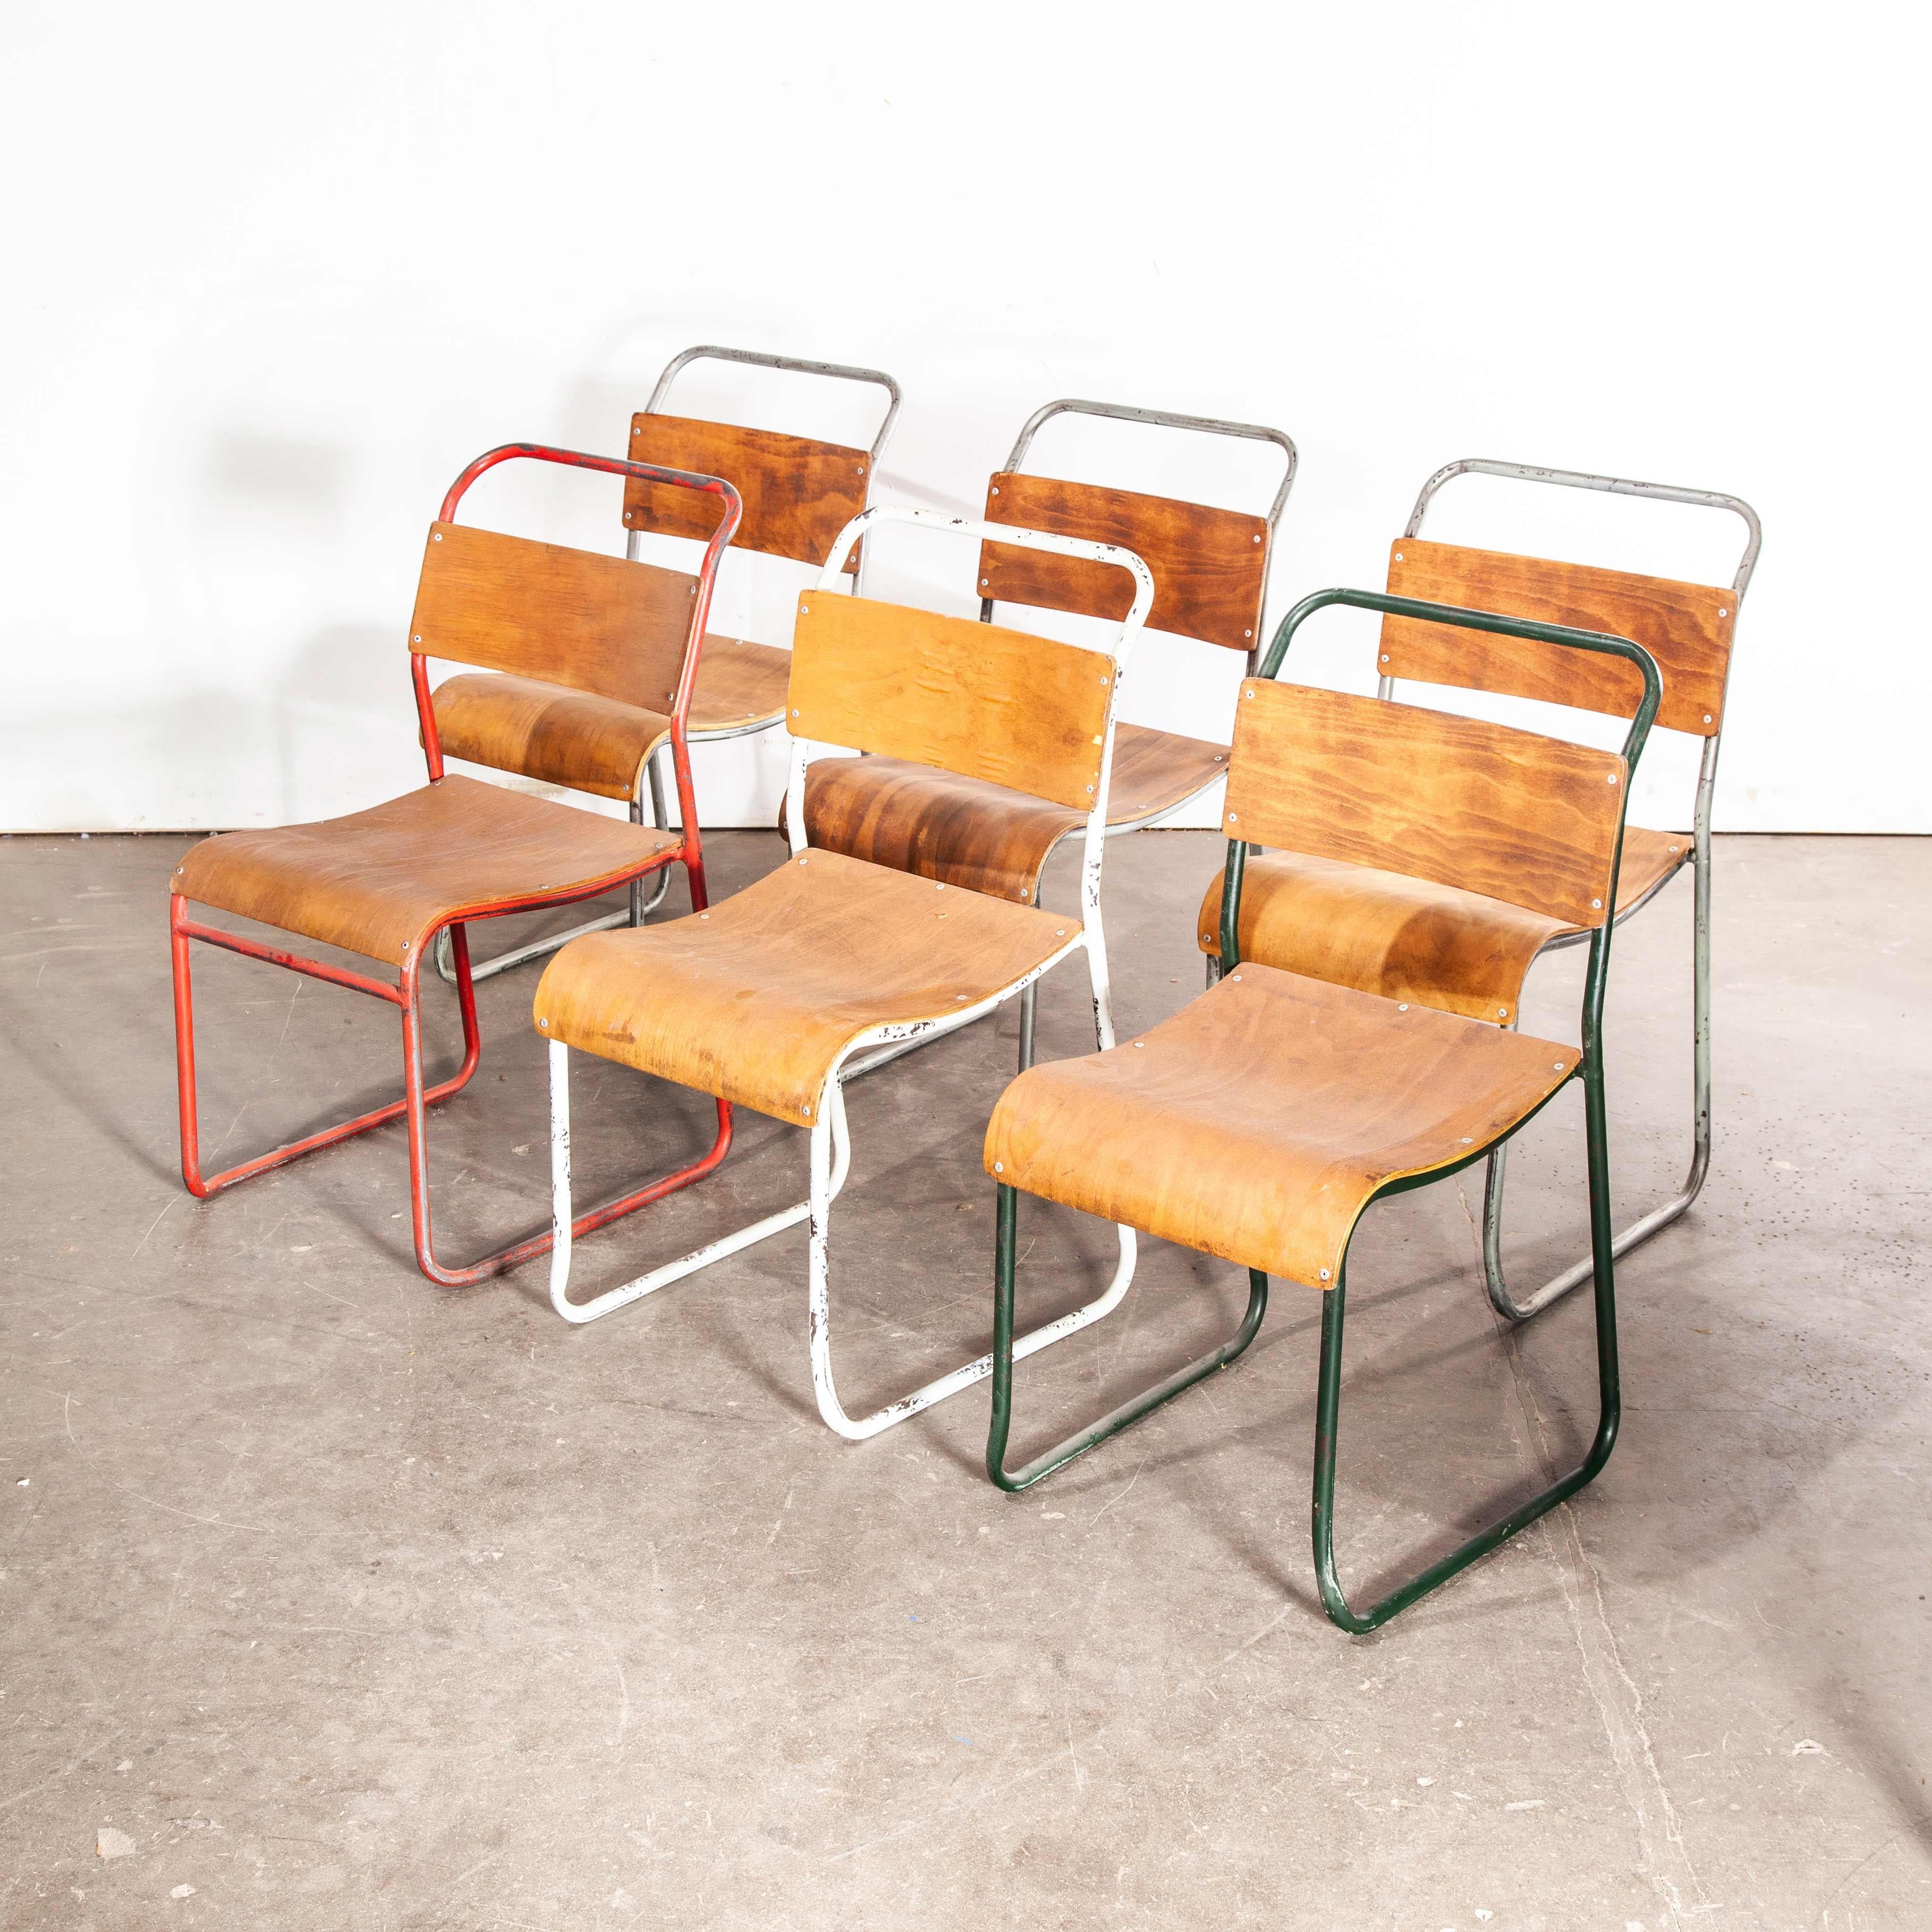 1960s Harlequin set of six metal and ply dining chairs
1960s vintage harlequin set of six dining chairs. Classic tubular metal and ply dining chairs based on the Bauhaus style design of Cox/Pel chairs, but these were made in the 1960s by the